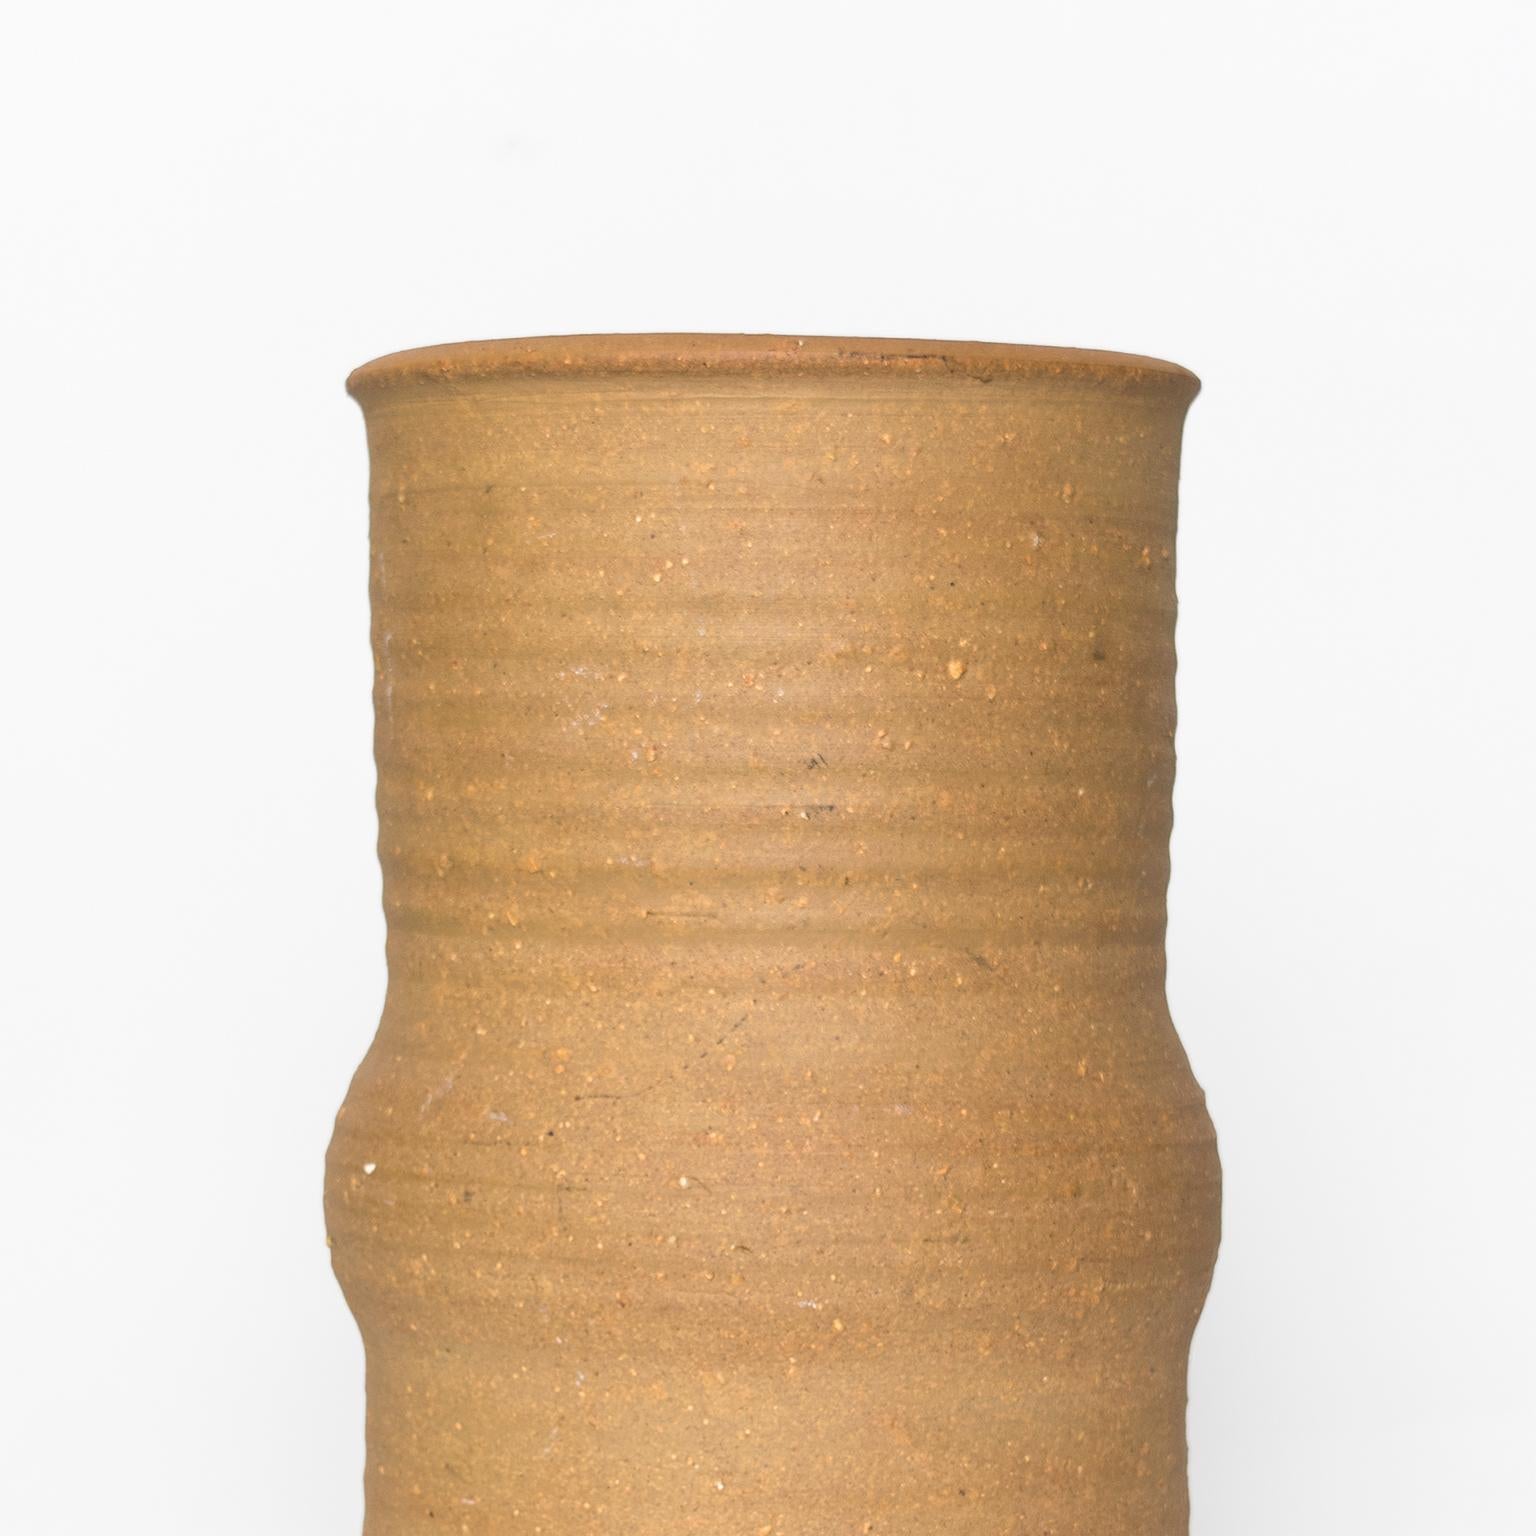 Tall Scandinavian Modern Ceramic Vase by Signe Persson-Melin In Excellent Condition For Sale In New York, NY